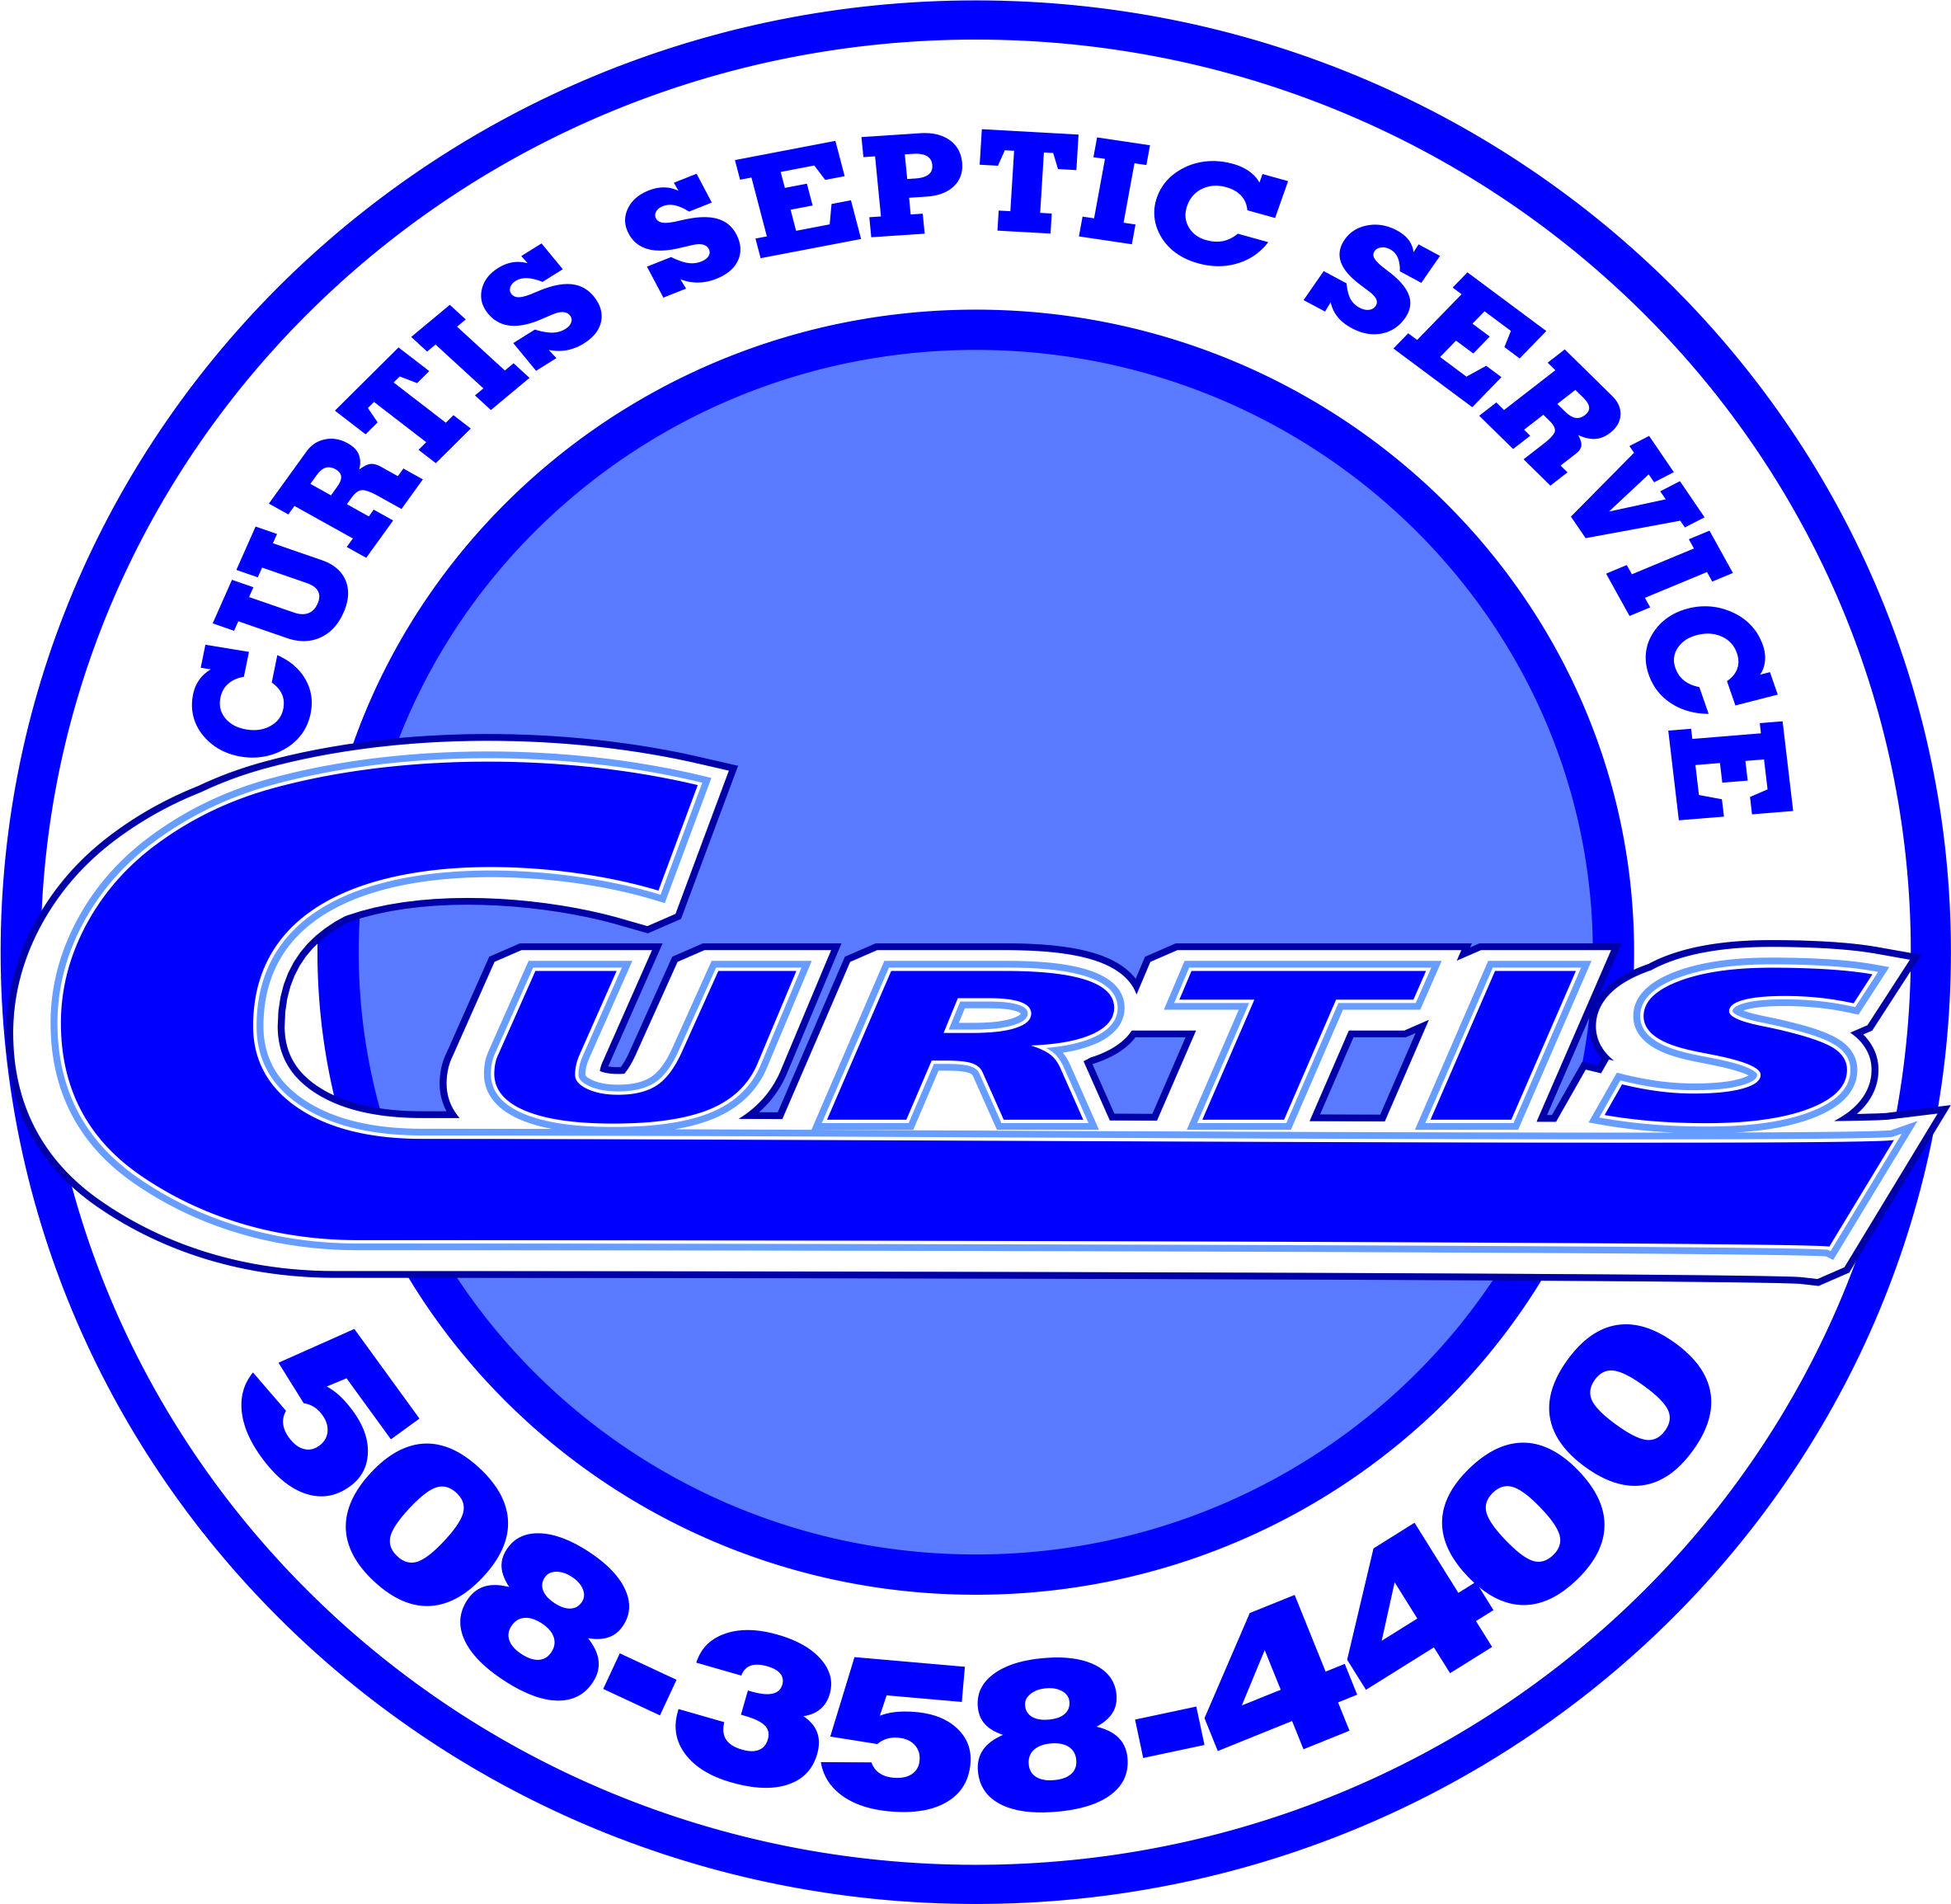 Septic system inspectors in Mendon, MA.